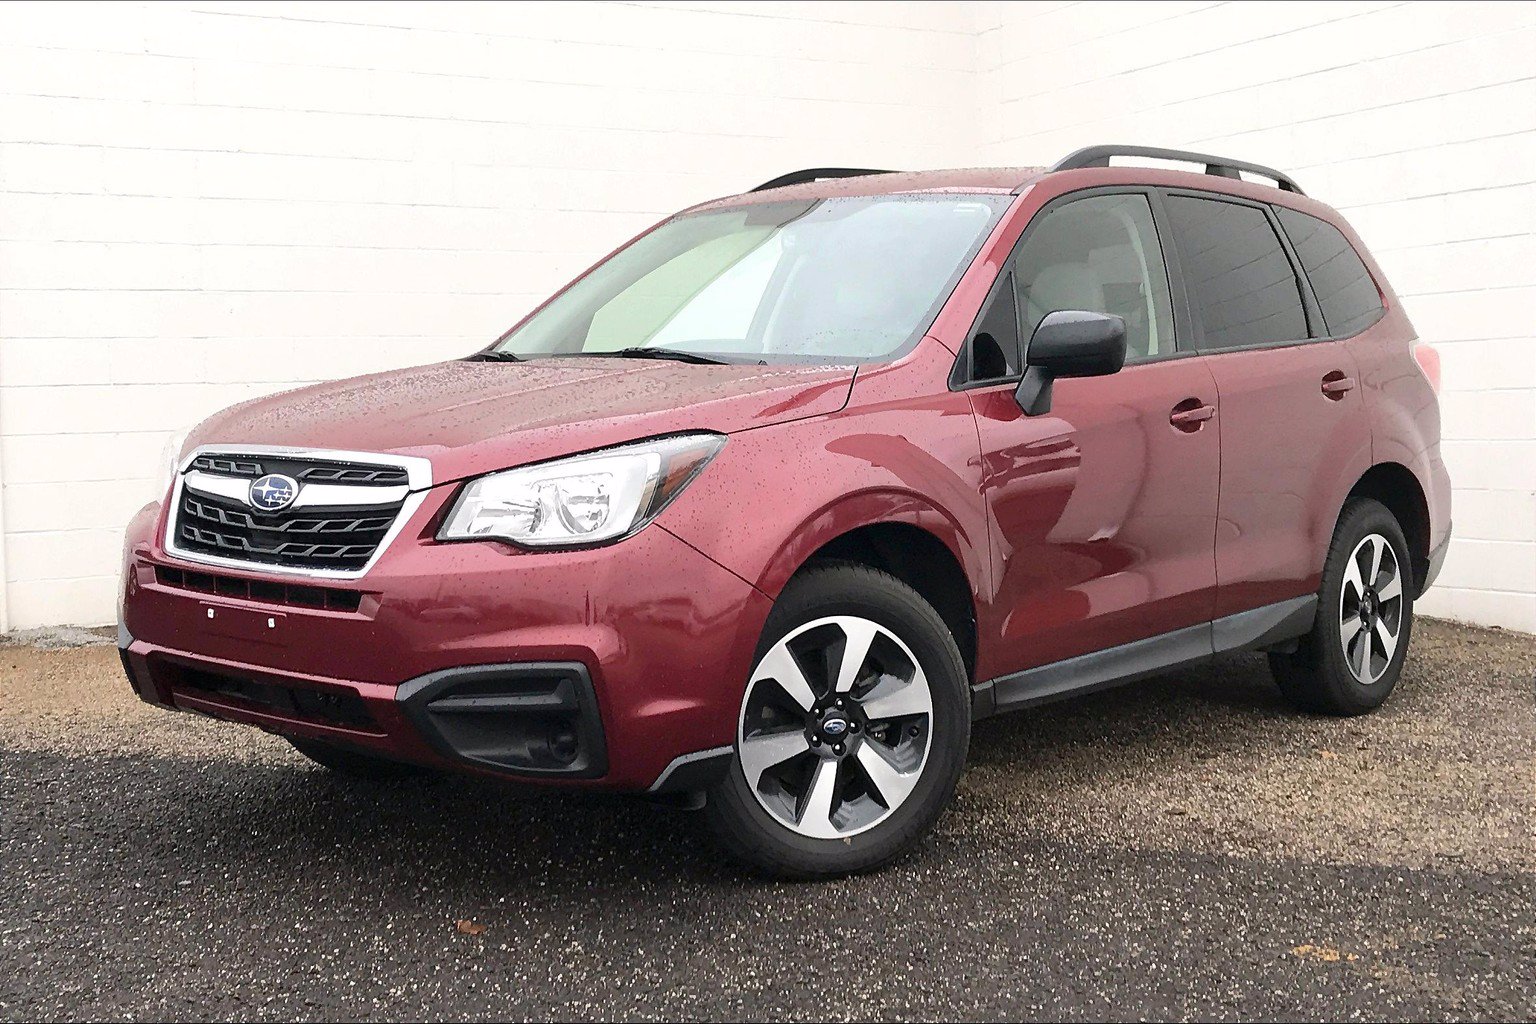 PreOwned 2017 Subaru Forester 2.5i 4D Sport Utility in